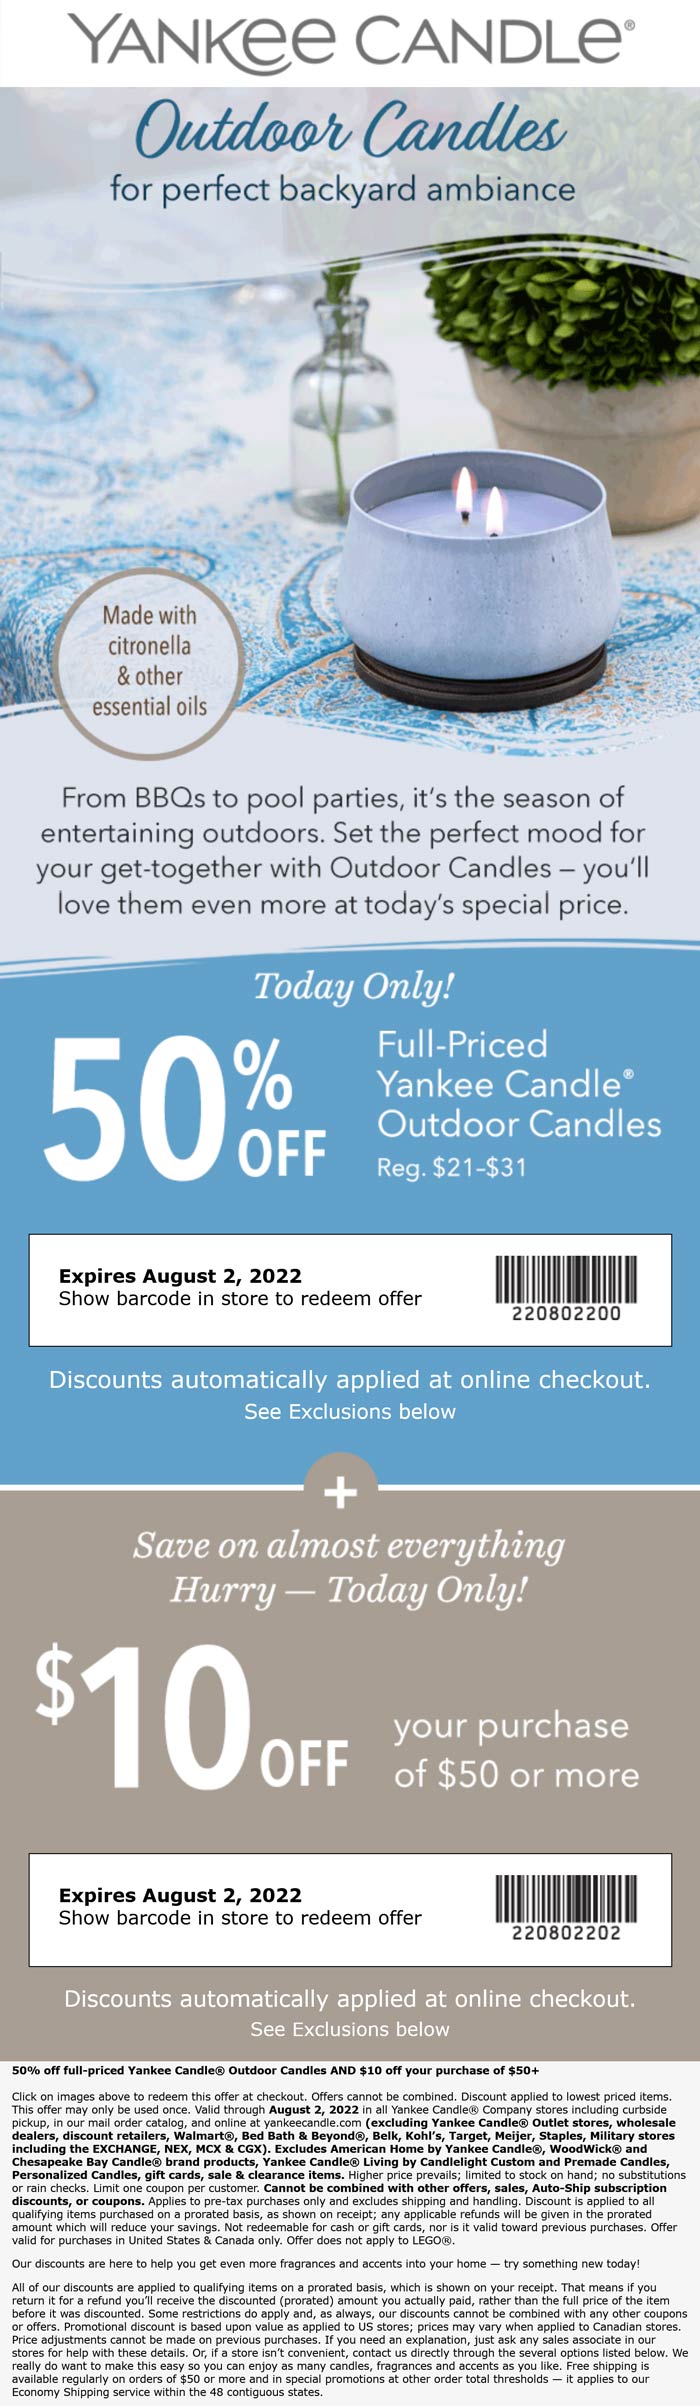 Yankee Candle stores Coupon  $10 off $50 & 50% off outdoor candles at Yankee Candle, ditto online #yankeecandle 